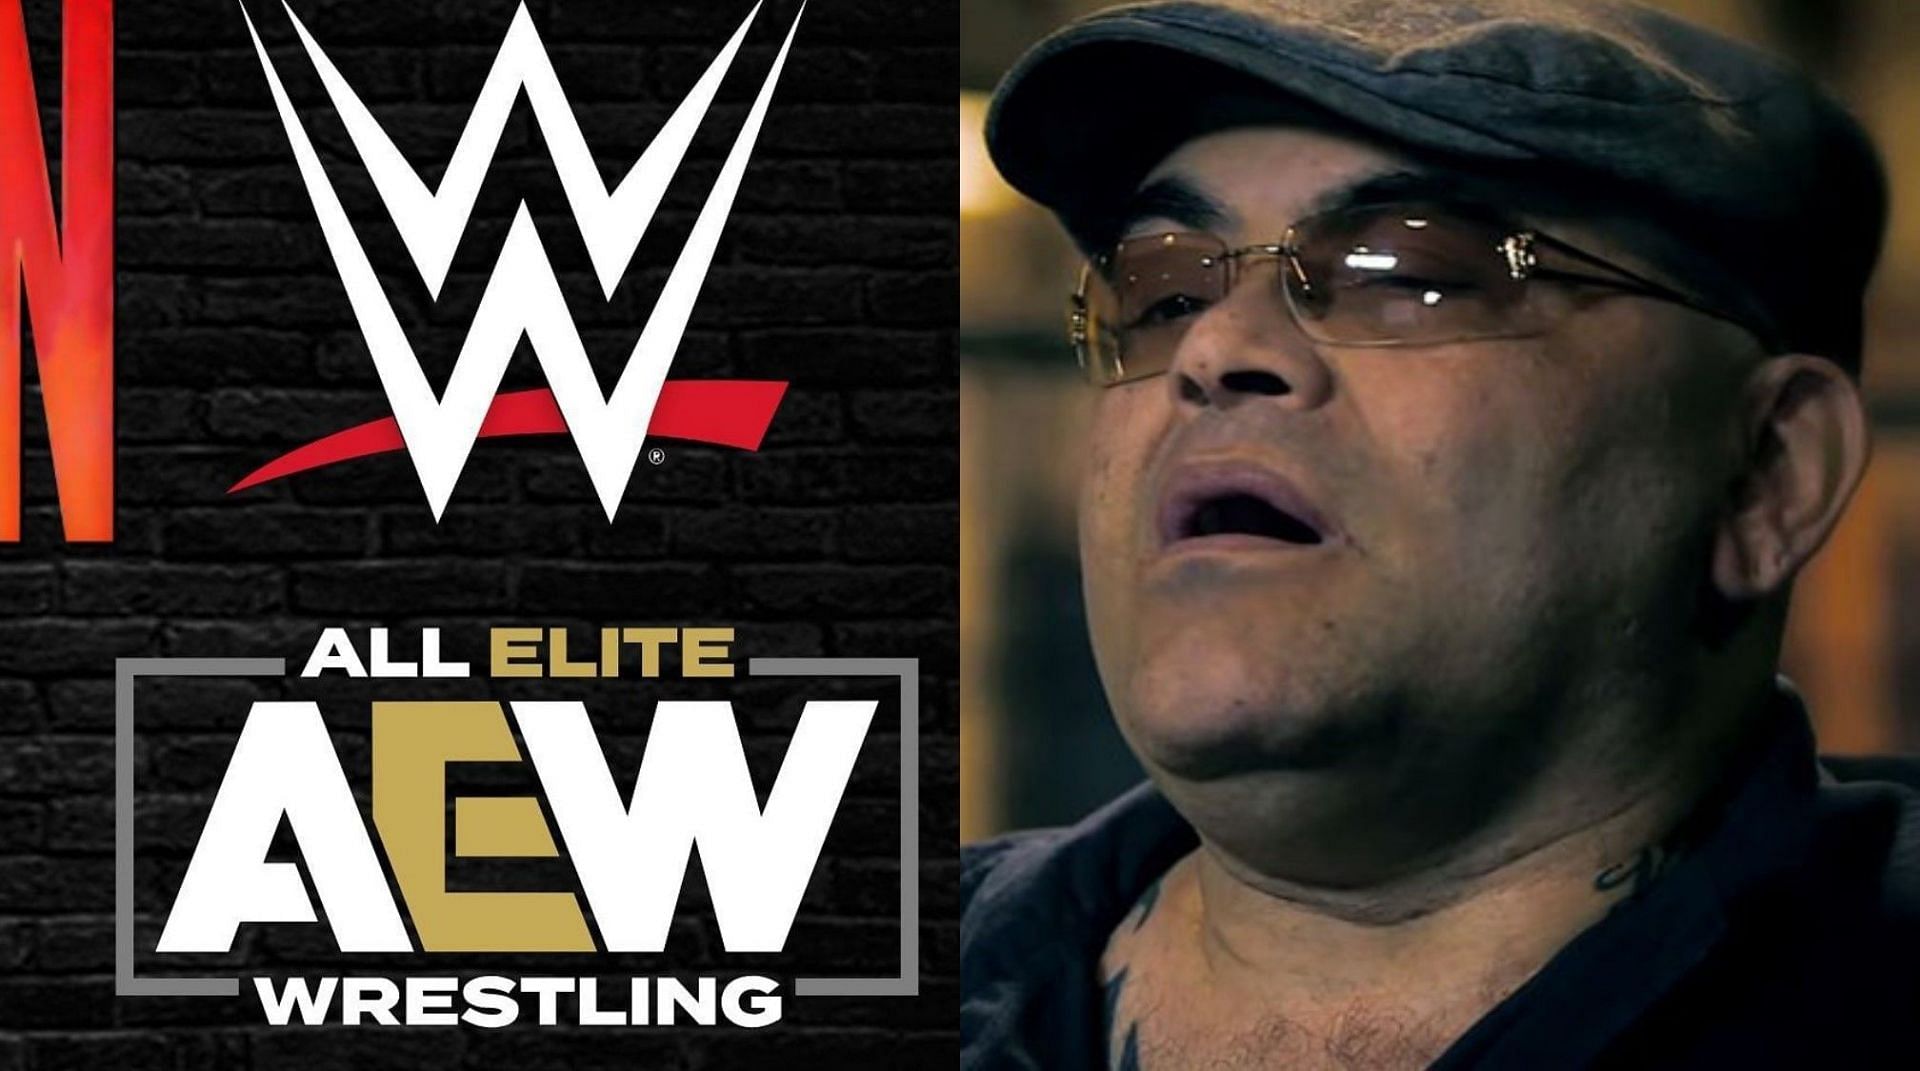 Konnan has weighed in on rumored AEW signing!